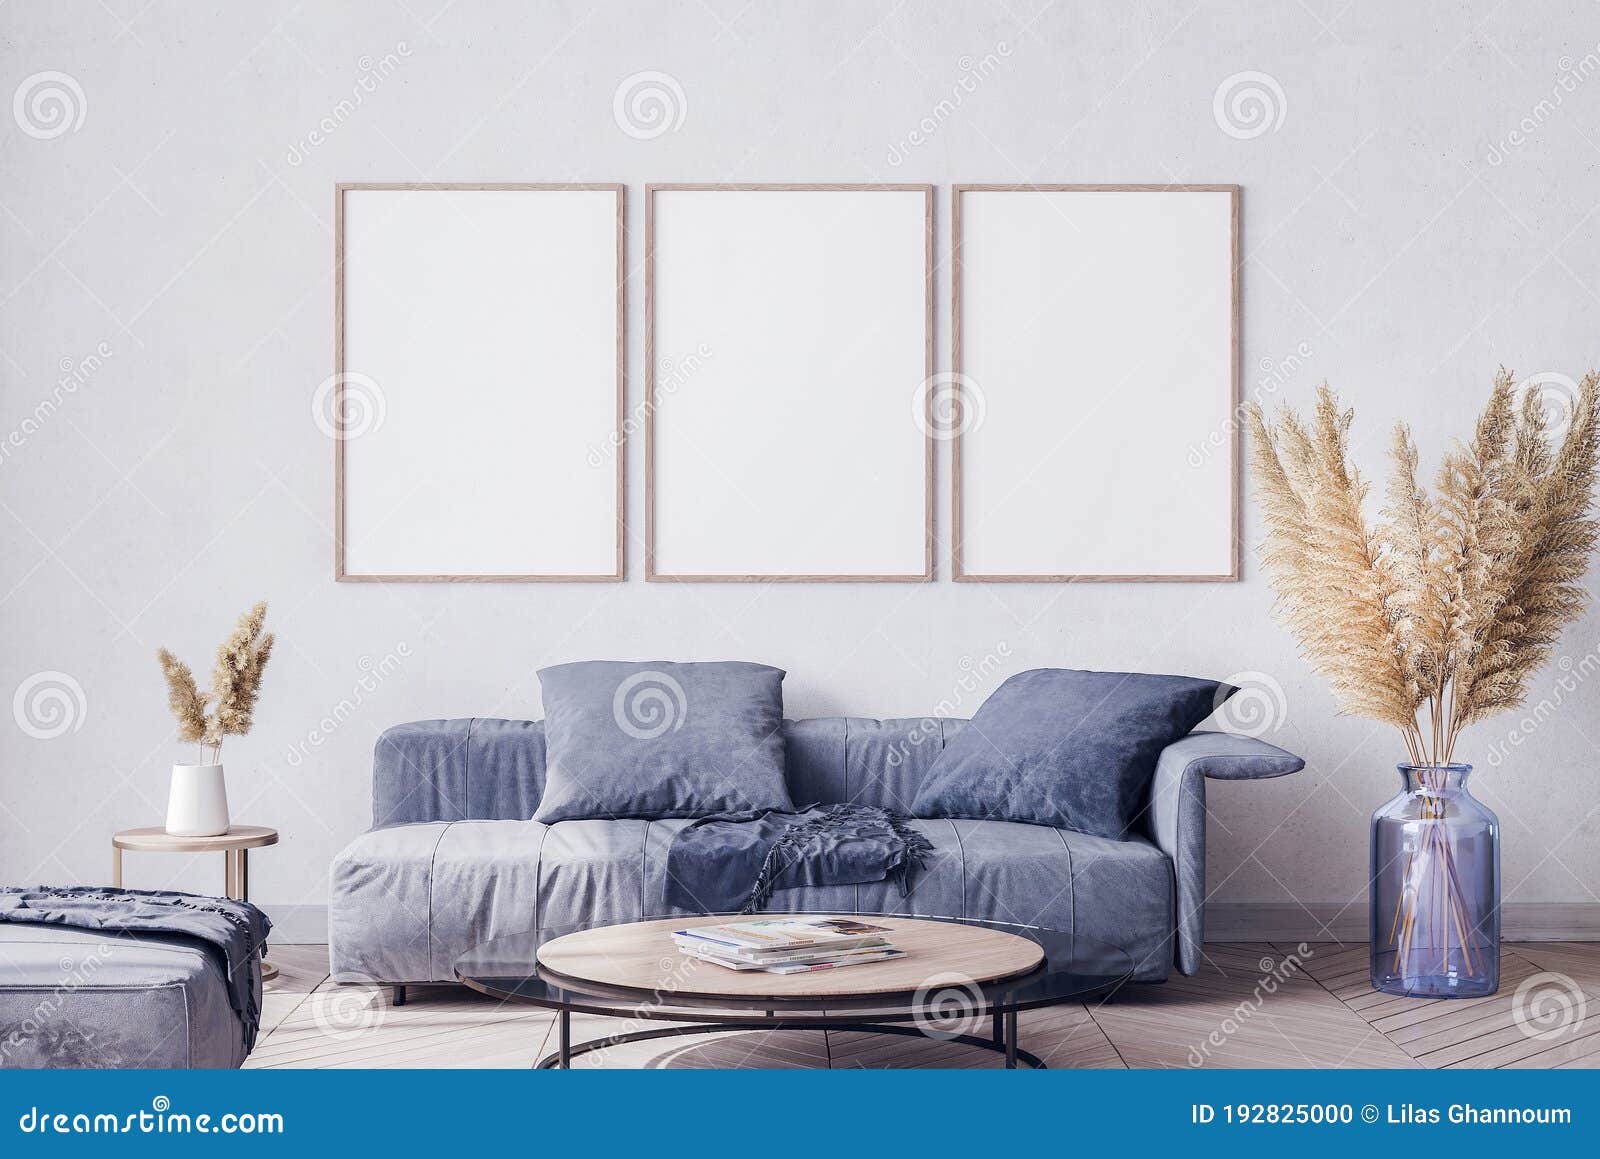 Poster Frame Mock Up in Living Room Interior with Blue Sofa and Pa,pas  Grass Stock Photo - Image of branding, empty: 192825000